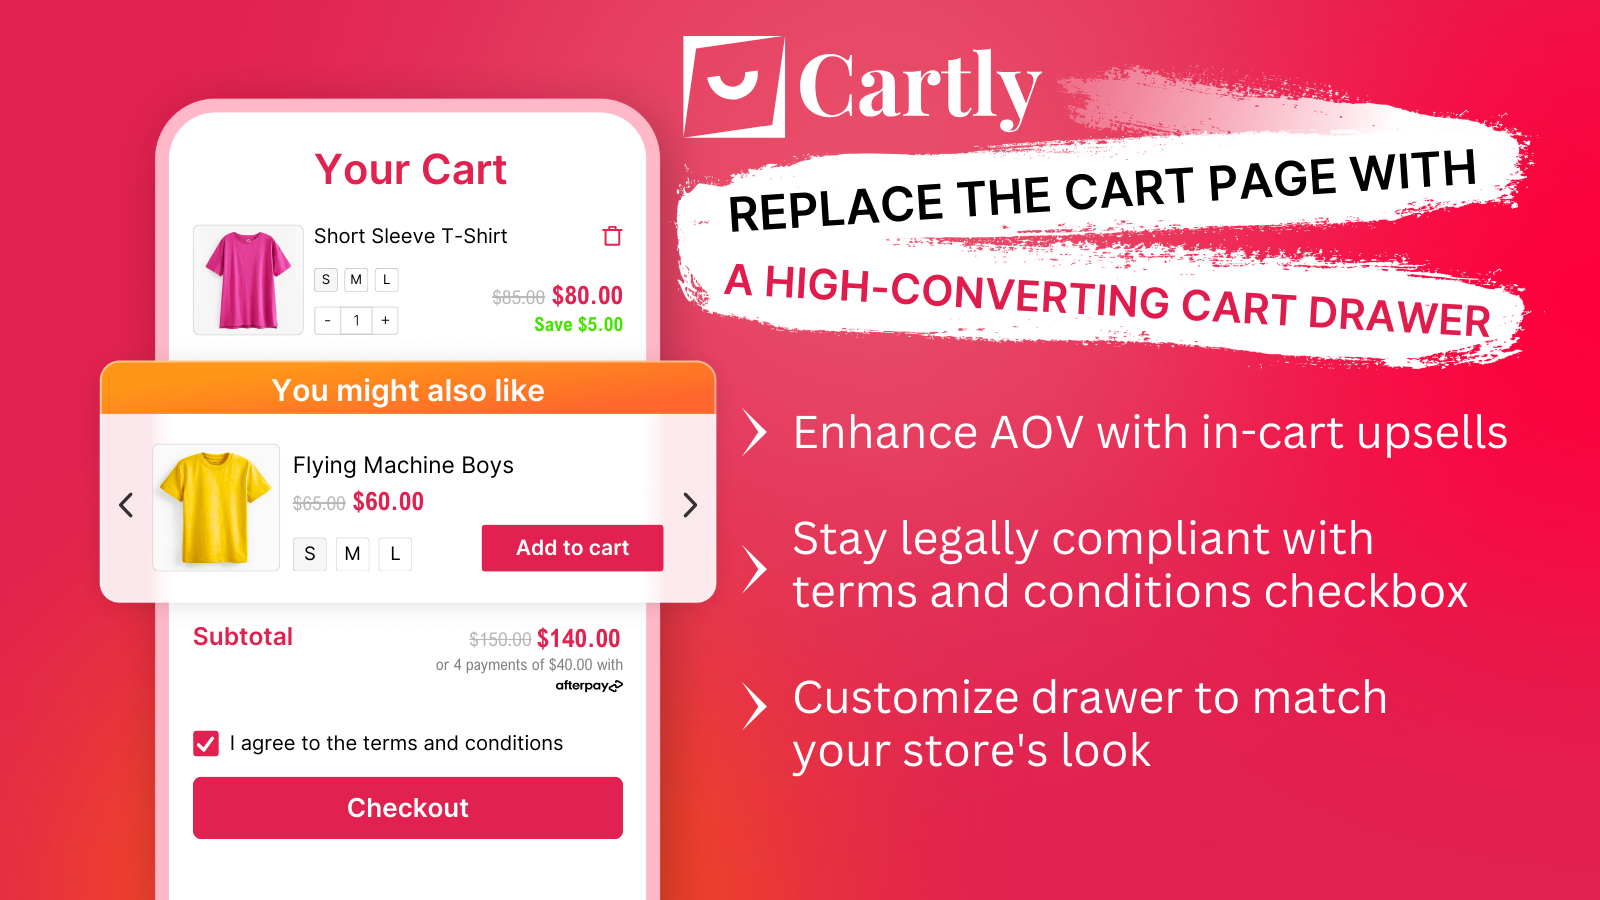 enhance AOV with cart drawer upsells and cross sell